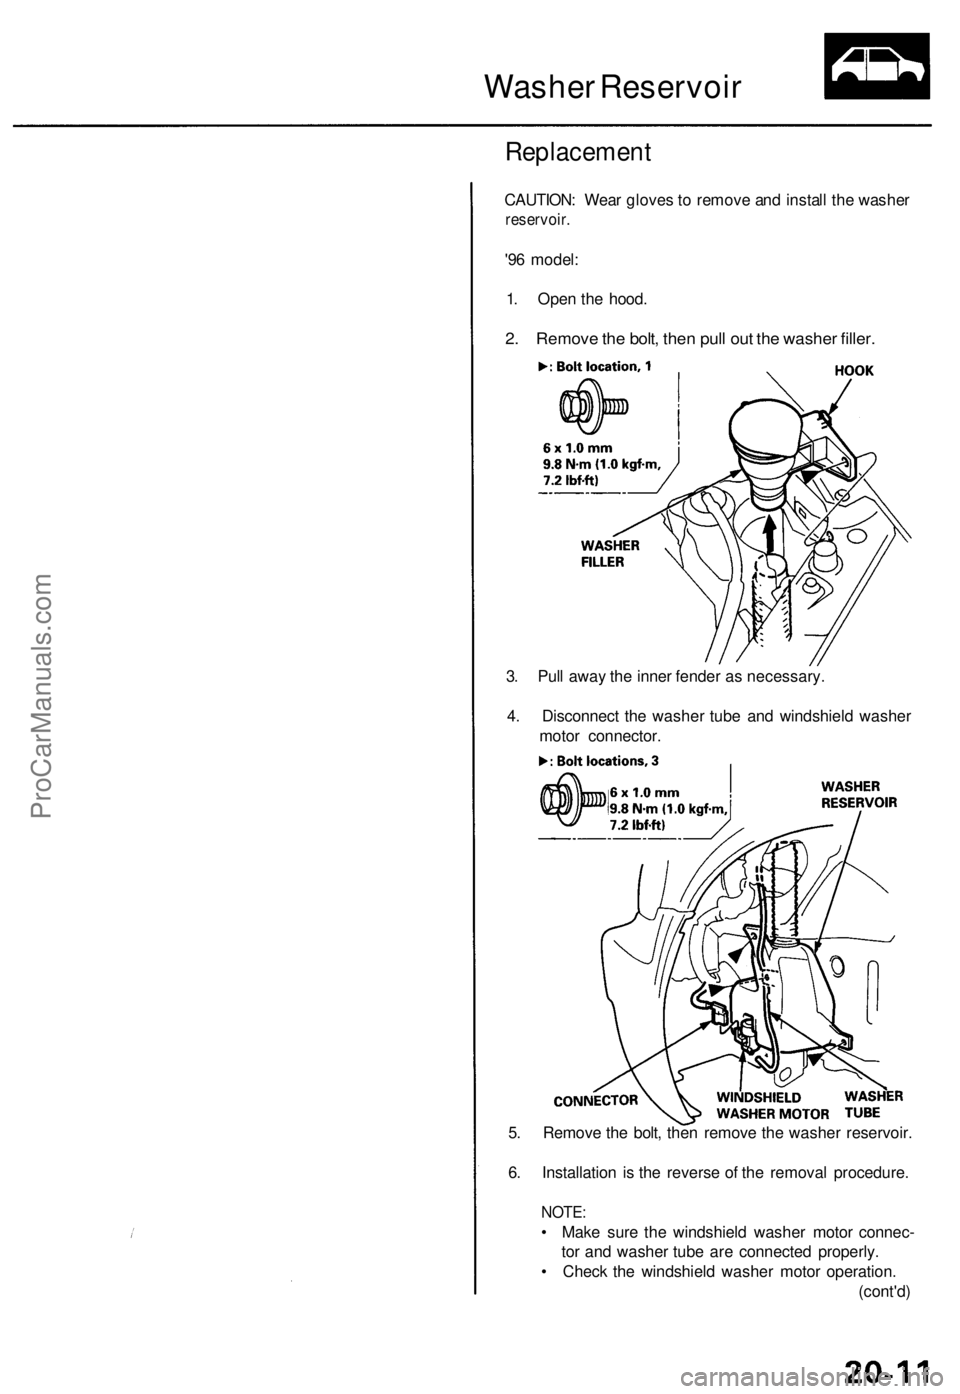 ACURA TL 1995  Service Repair Manual 
Washer Reservoir

Replacement

CAUTION: Wear gloves to remove and install the washer

reservoir.

'96 model:

1. Open the hood.

2. Remove the bolt, then pull out the washer filler.

3. Pull away